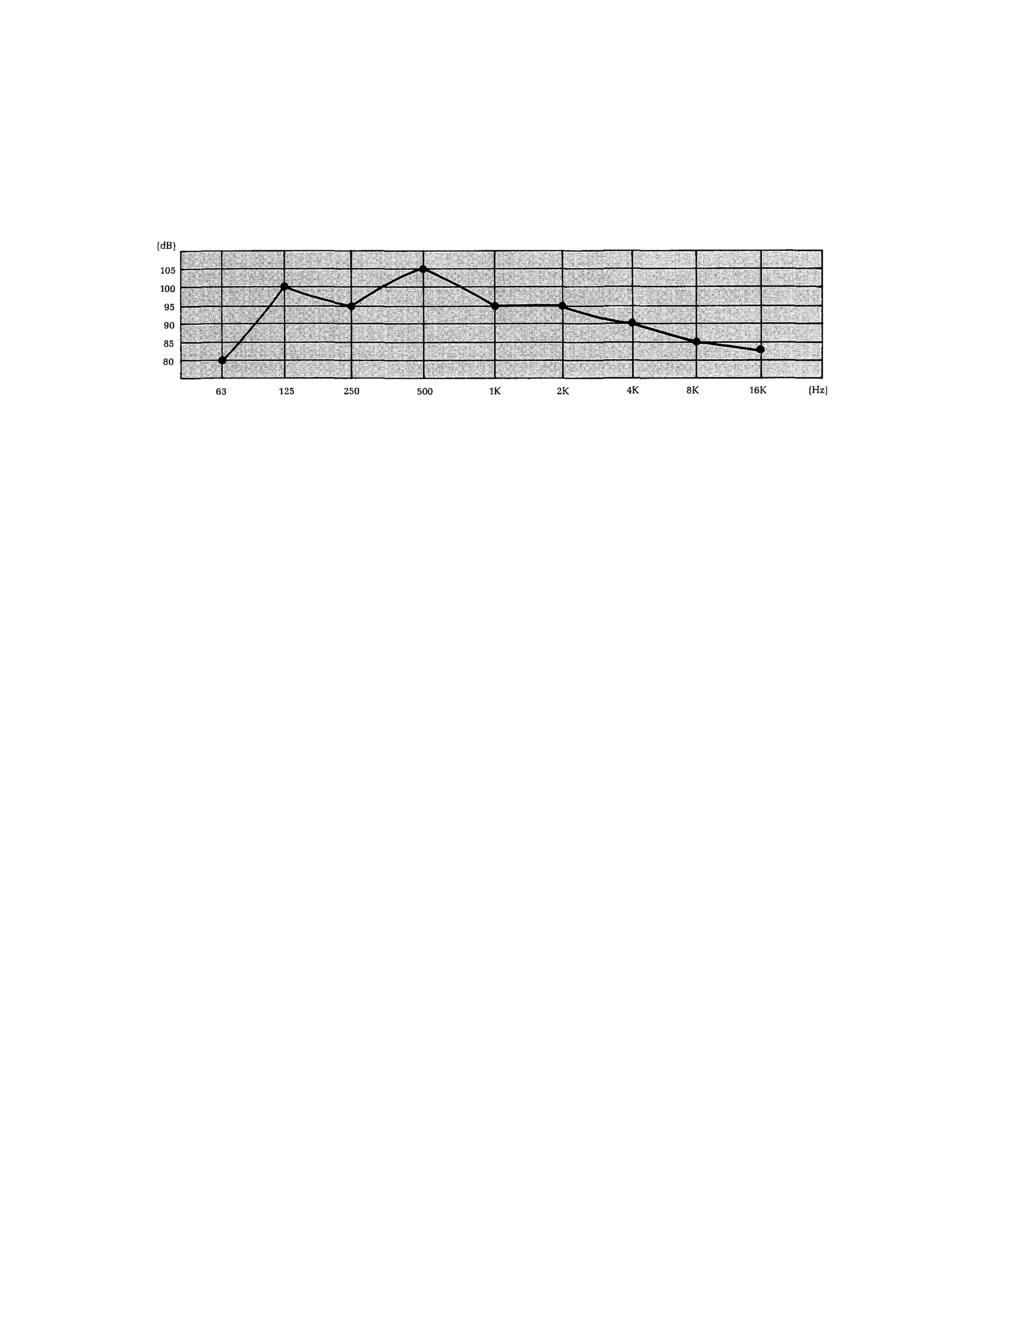 Channel and Graphic Equalizers Feedback Prevention When the overall gain of a sound system is increased, feedback will occur at frequencies where the system response has peaks.